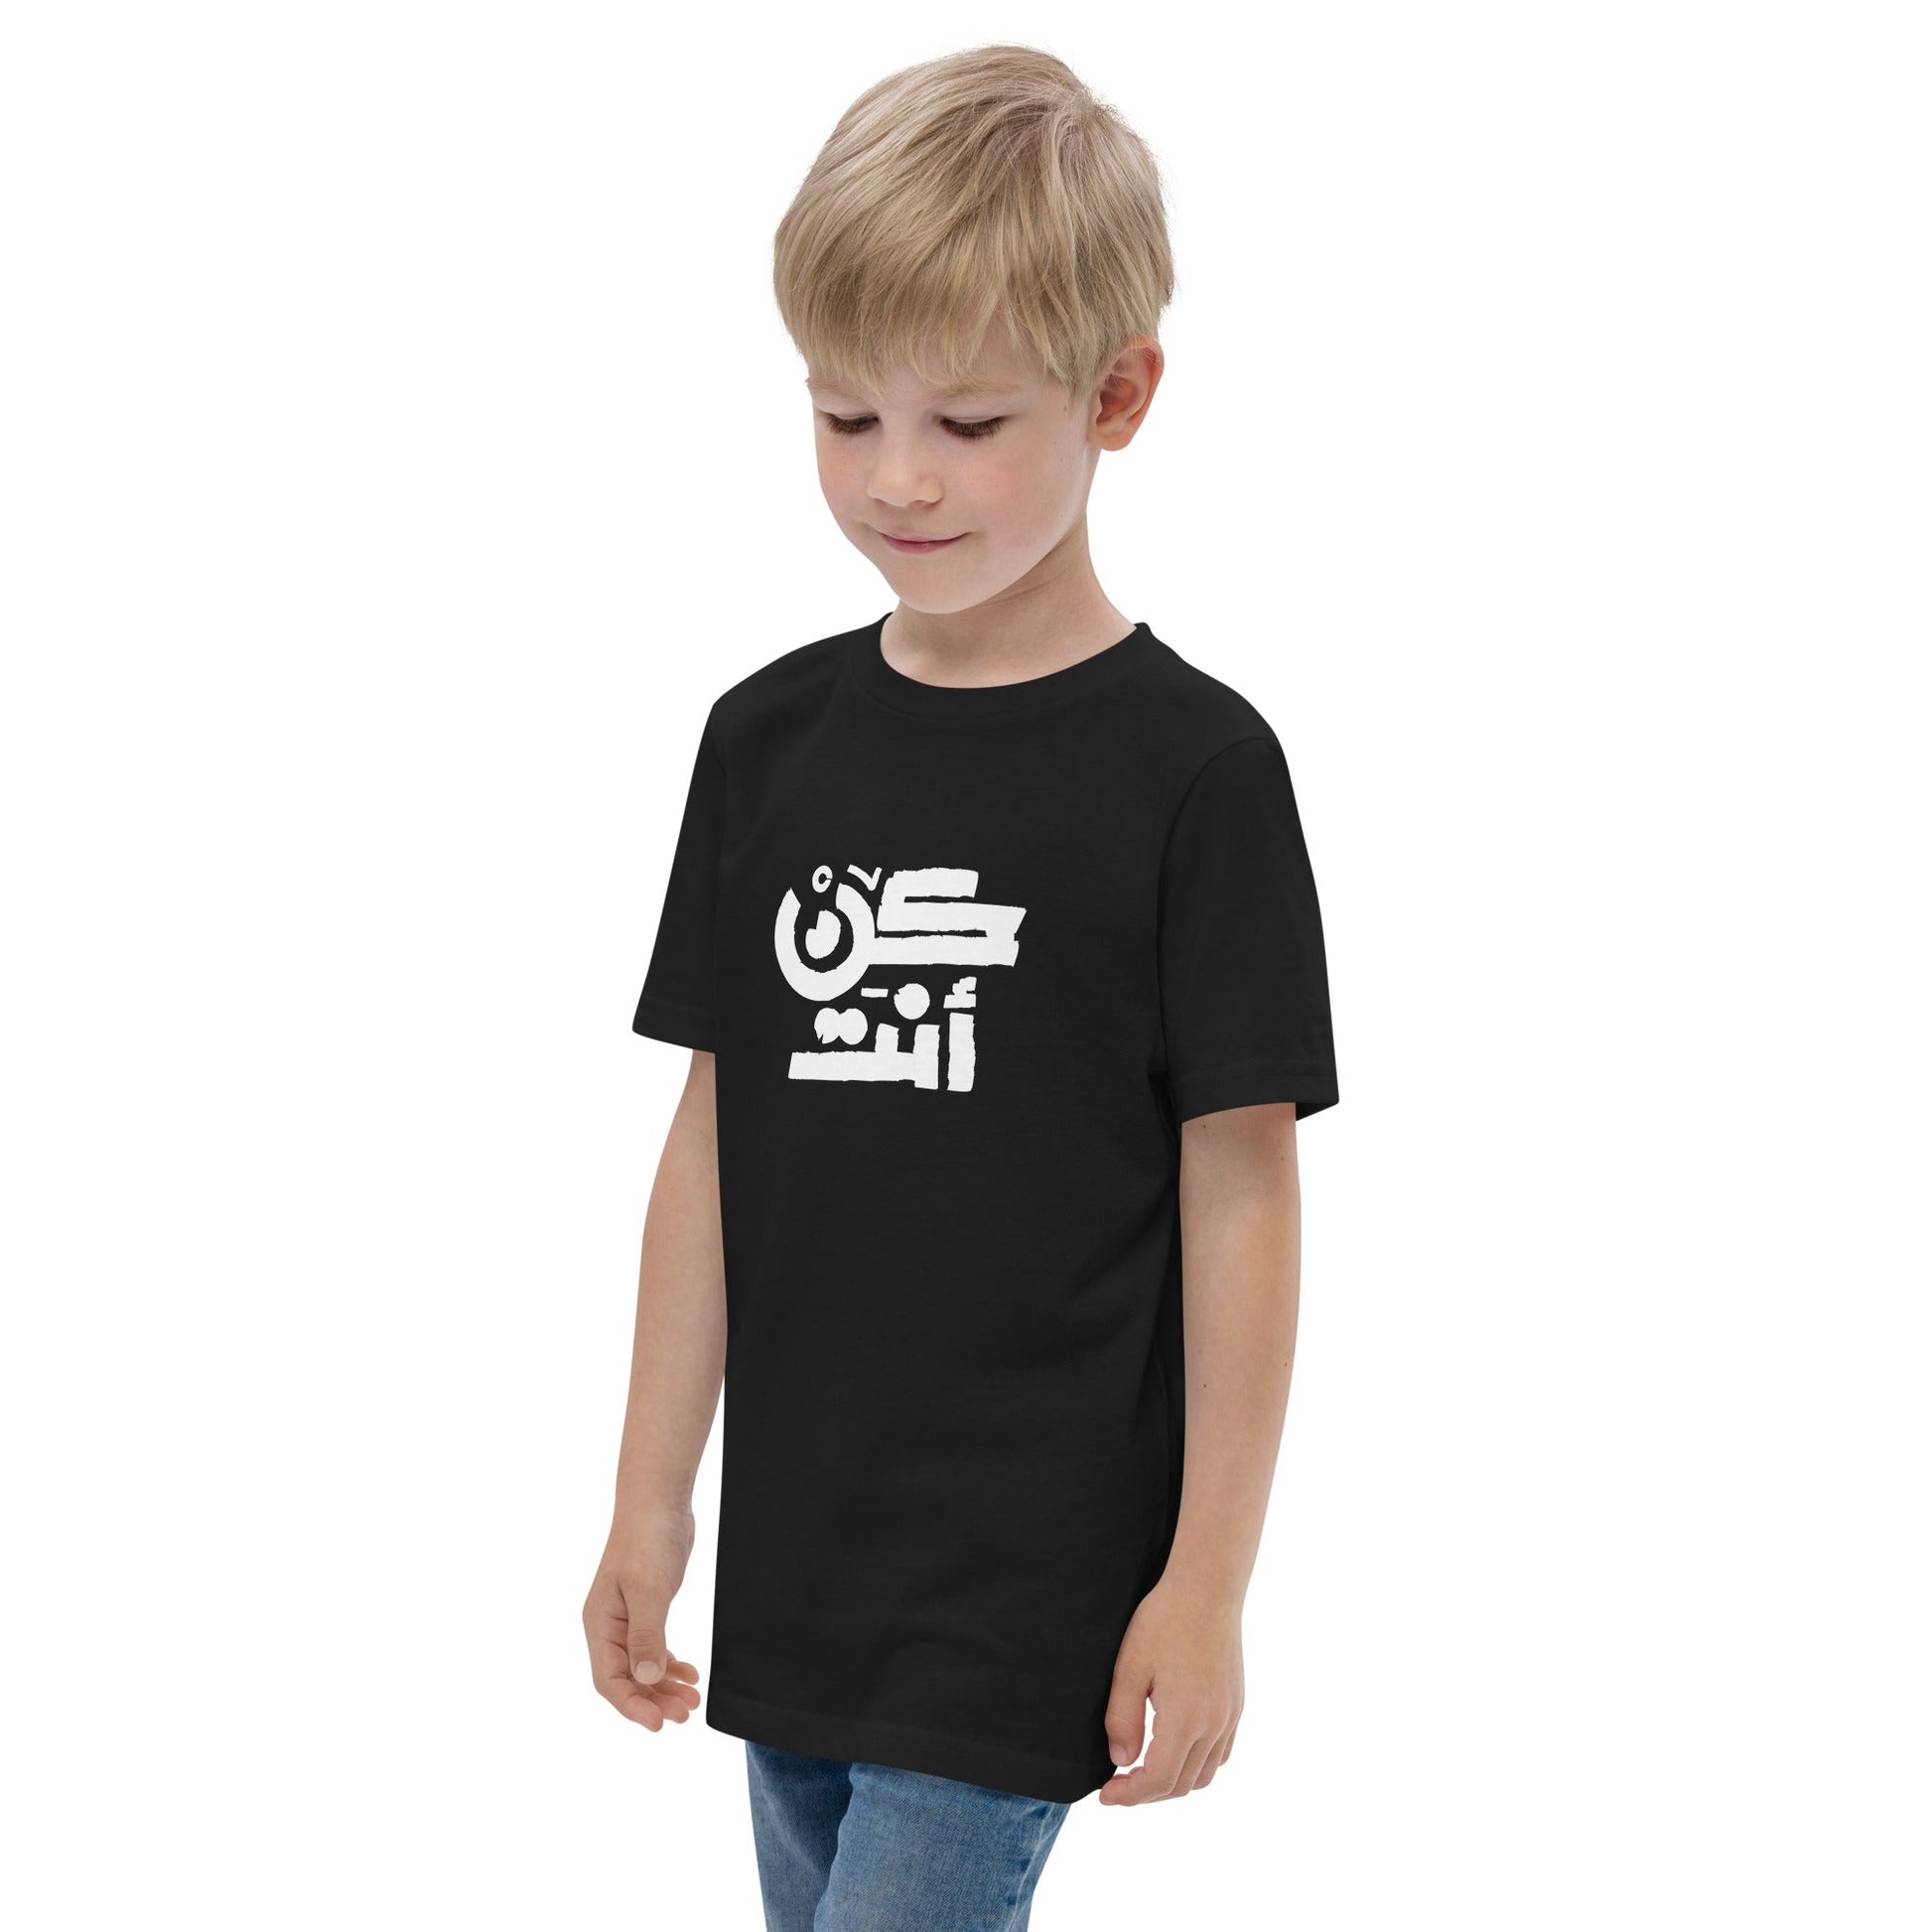 youth-jersey-tshirt-be-yourself-black